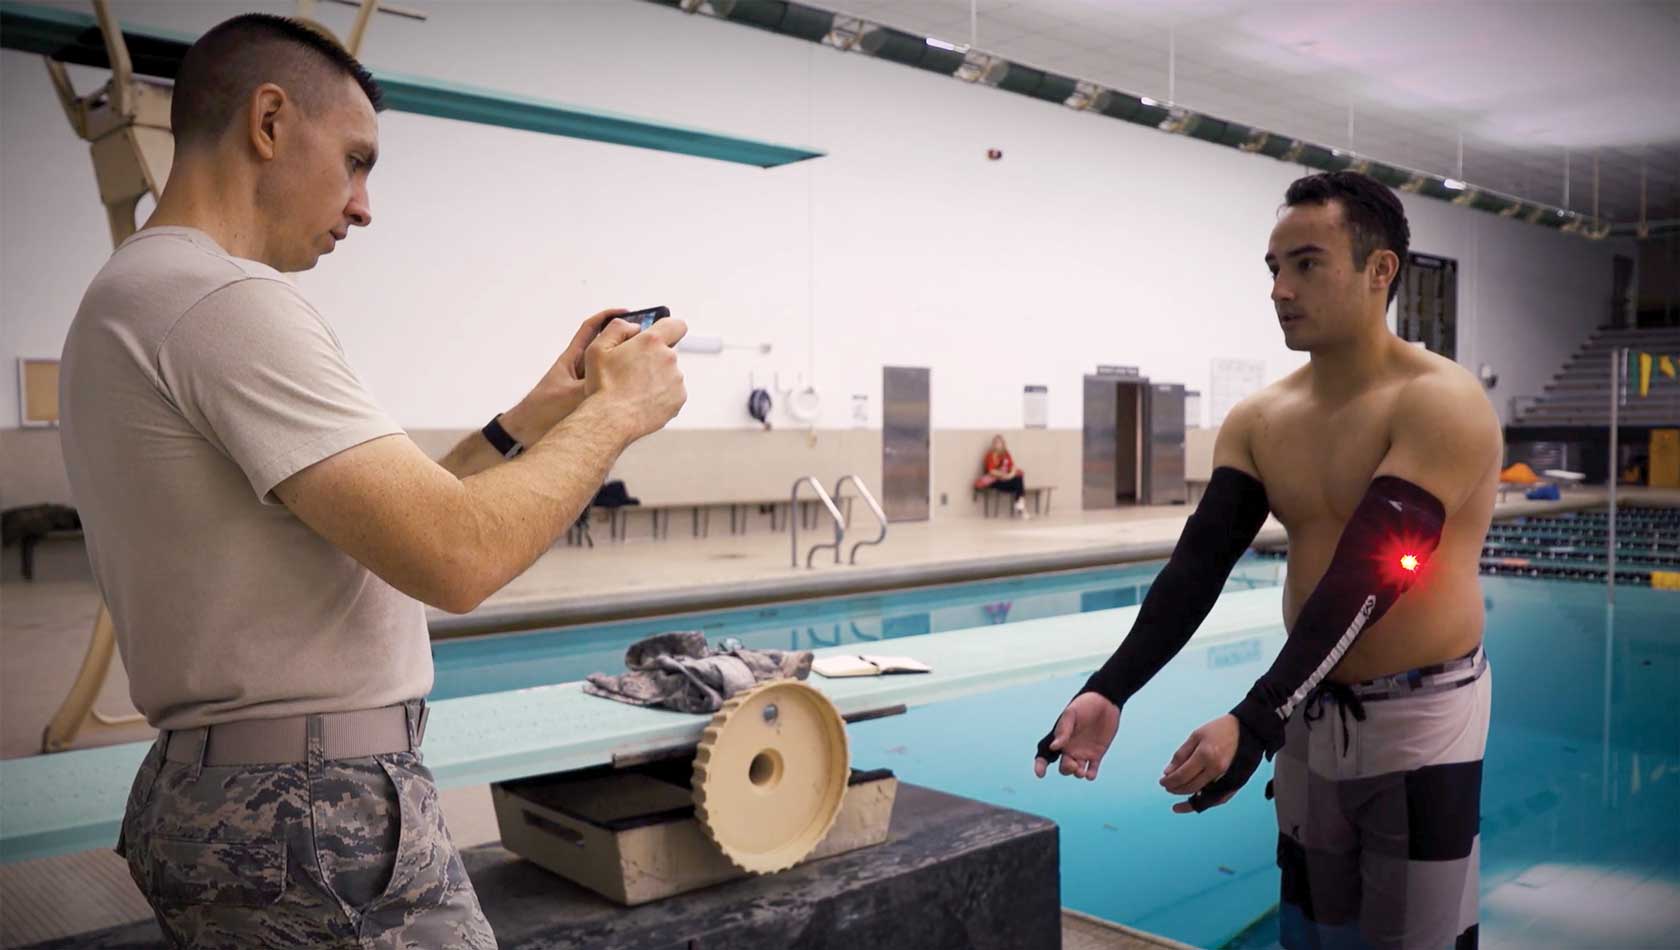 Screenshot of a video of Air Force Research Laboratory engineers testing the Flashing Indicator of Swimmer’s Health (FISH) system at Wright State University, Dayton, OH, Nov. 27, 2019. FISH is a personal underwater blood-oxygen monitor that detects potential blackout conditions and alerts users.